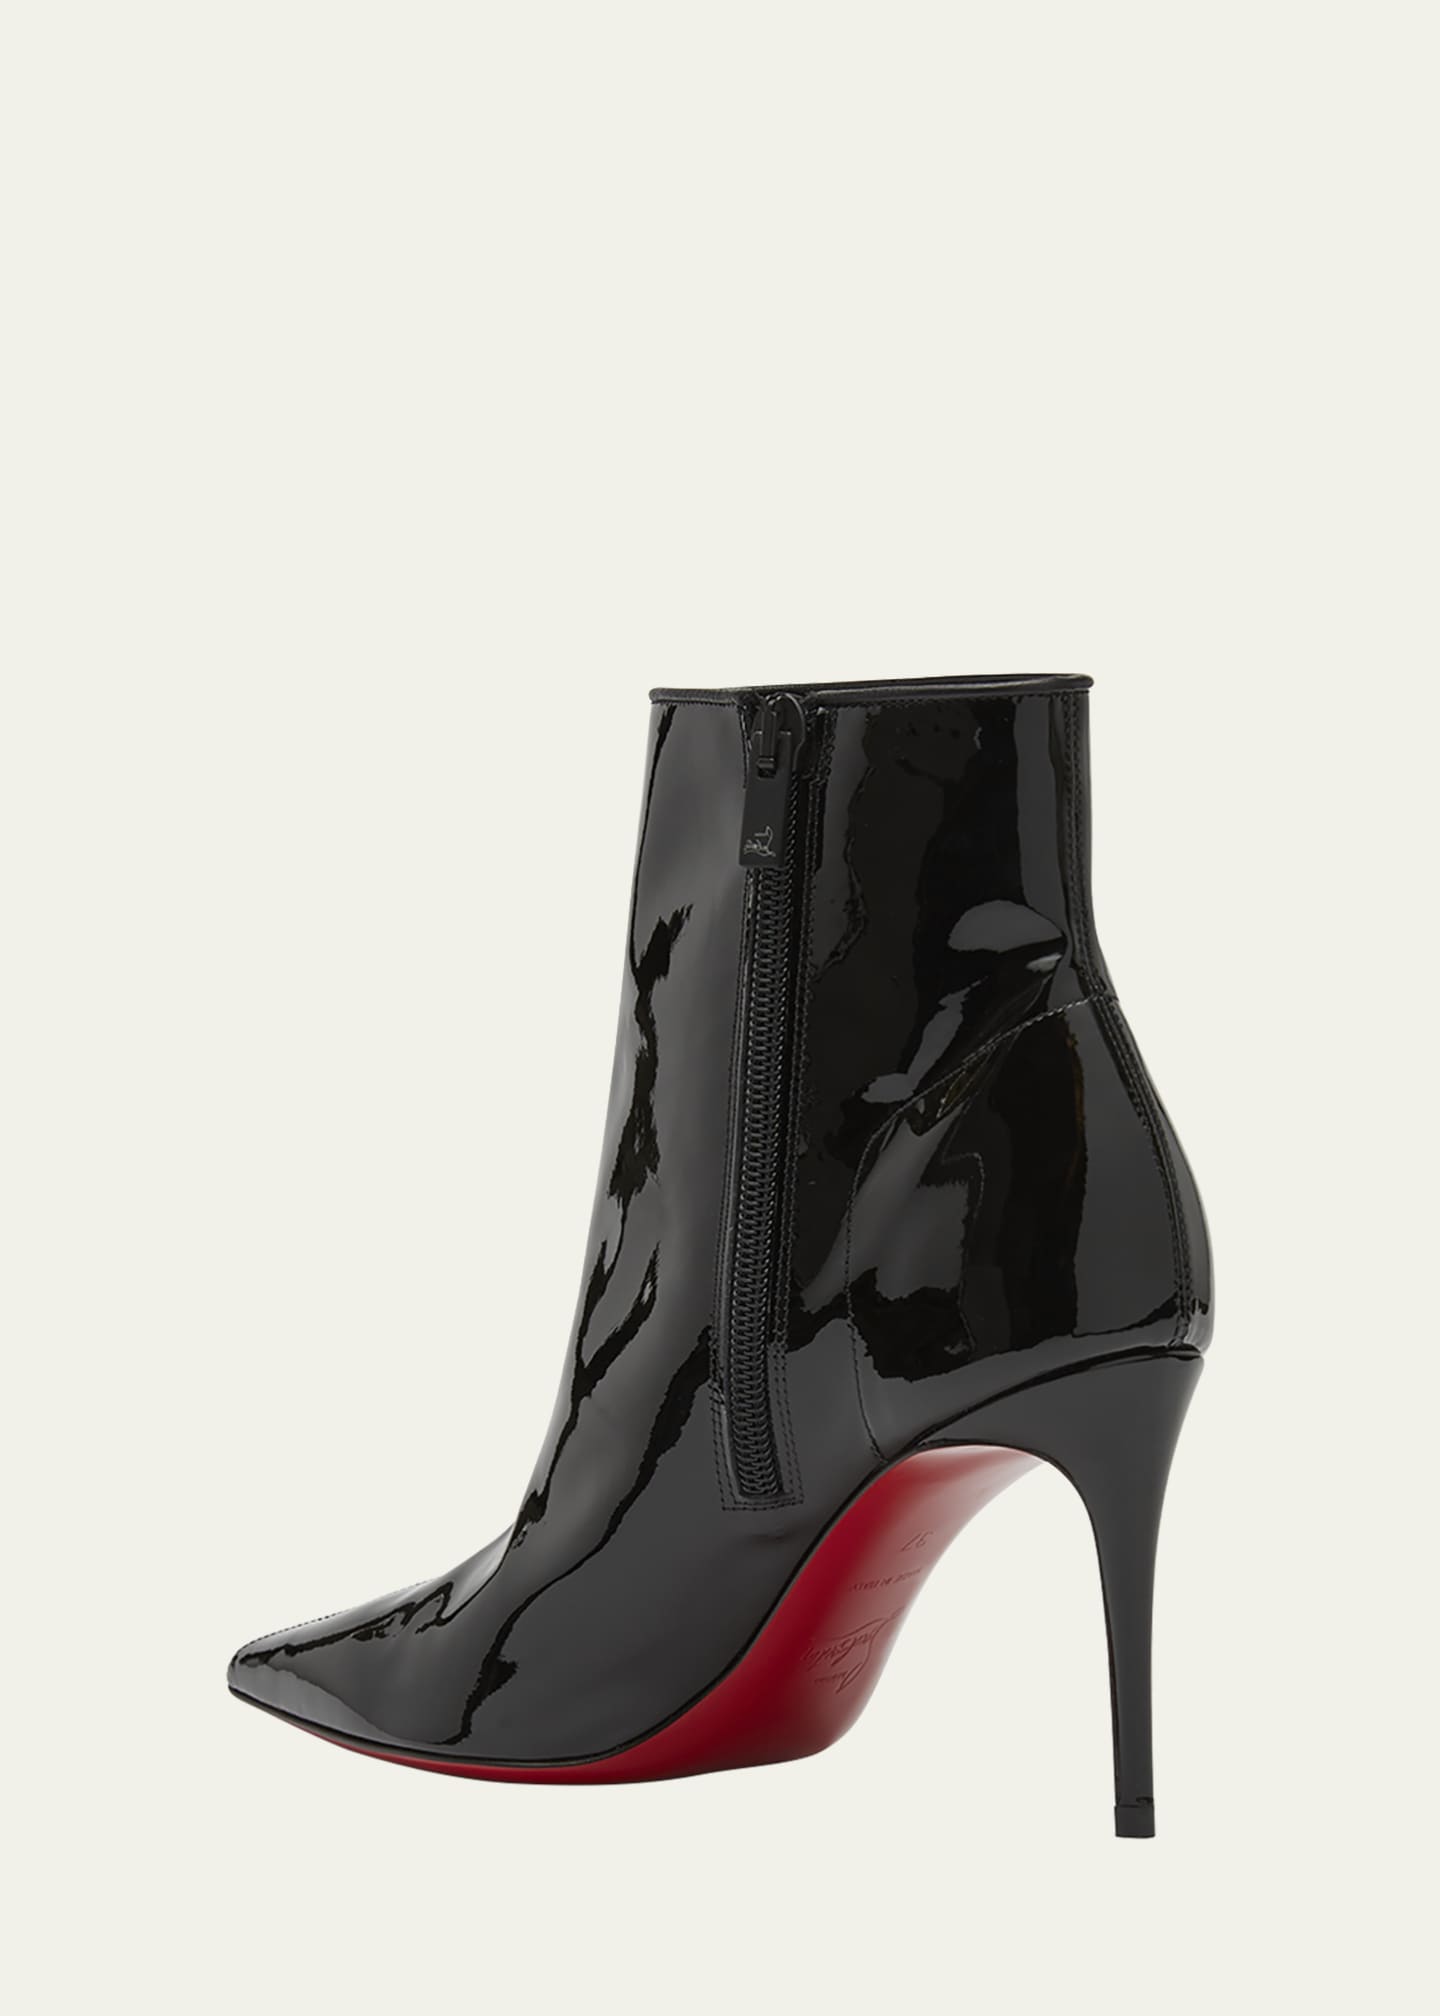 Christian Louboutin Kate Sporty Patent Red Sole Booties - Bergdorf Goodman